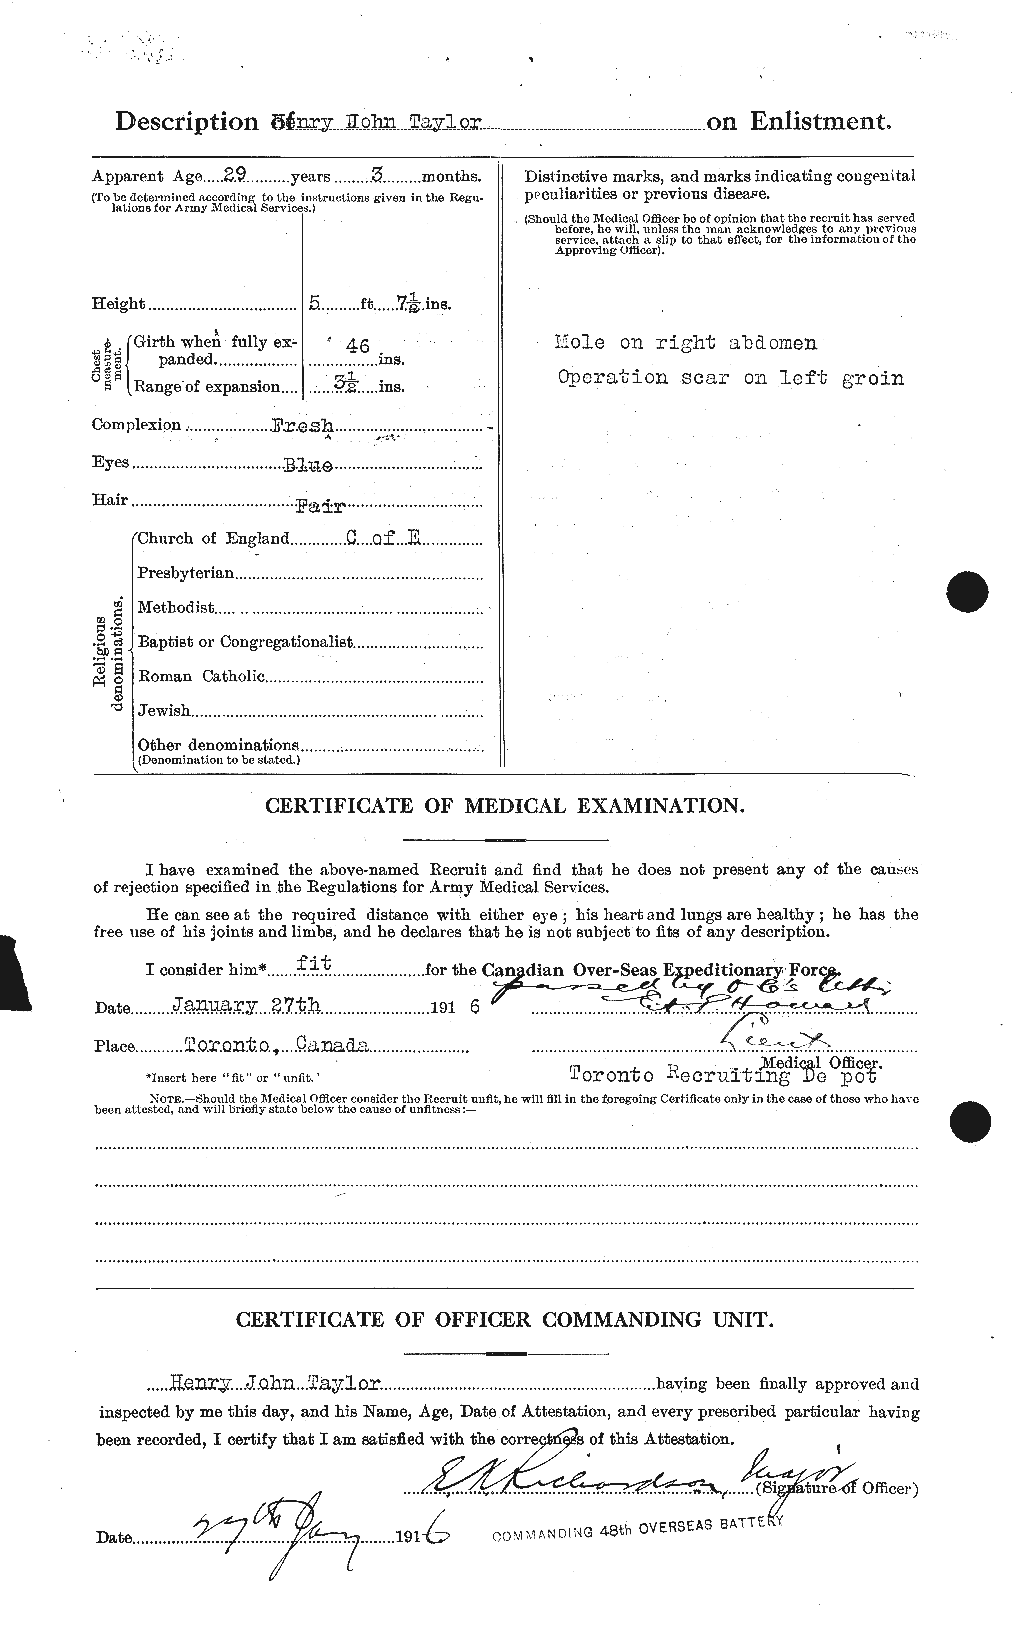 Personnel Records of the First World War - CEF 626544b